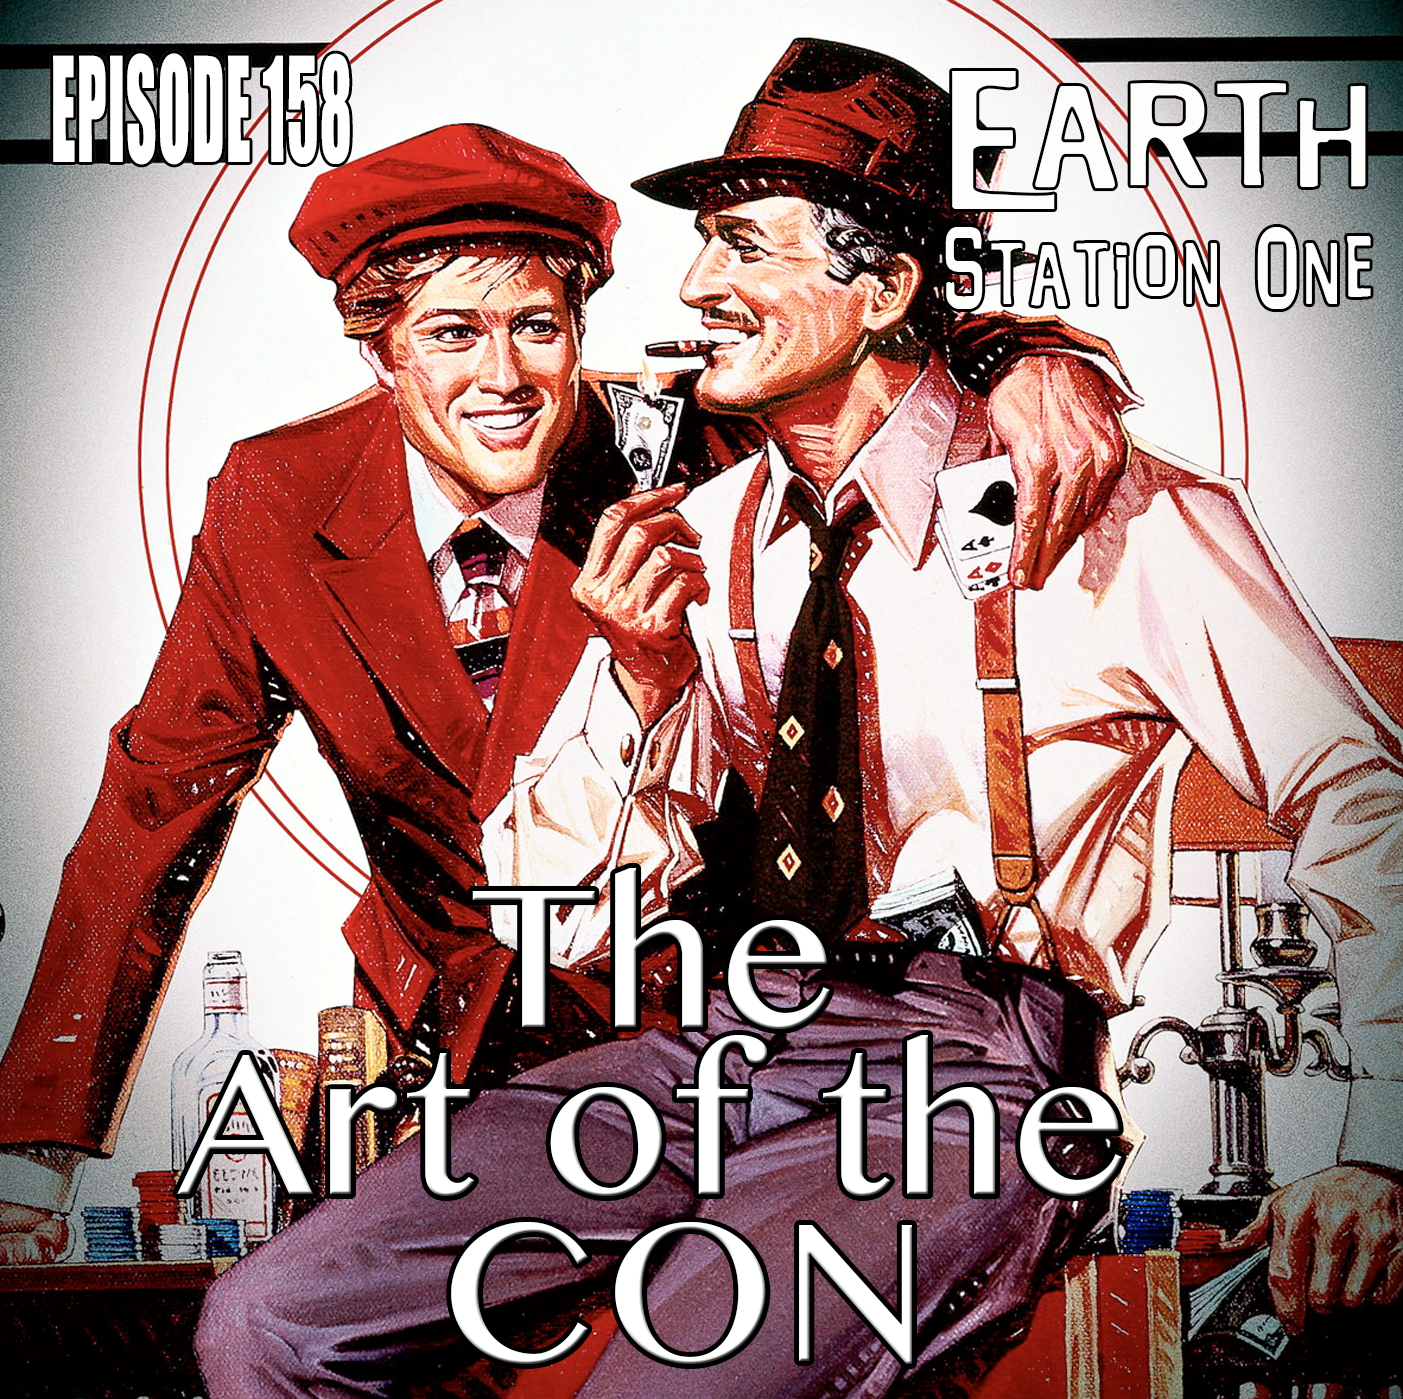 Earth Station One Episode 158 - The Art of the Con